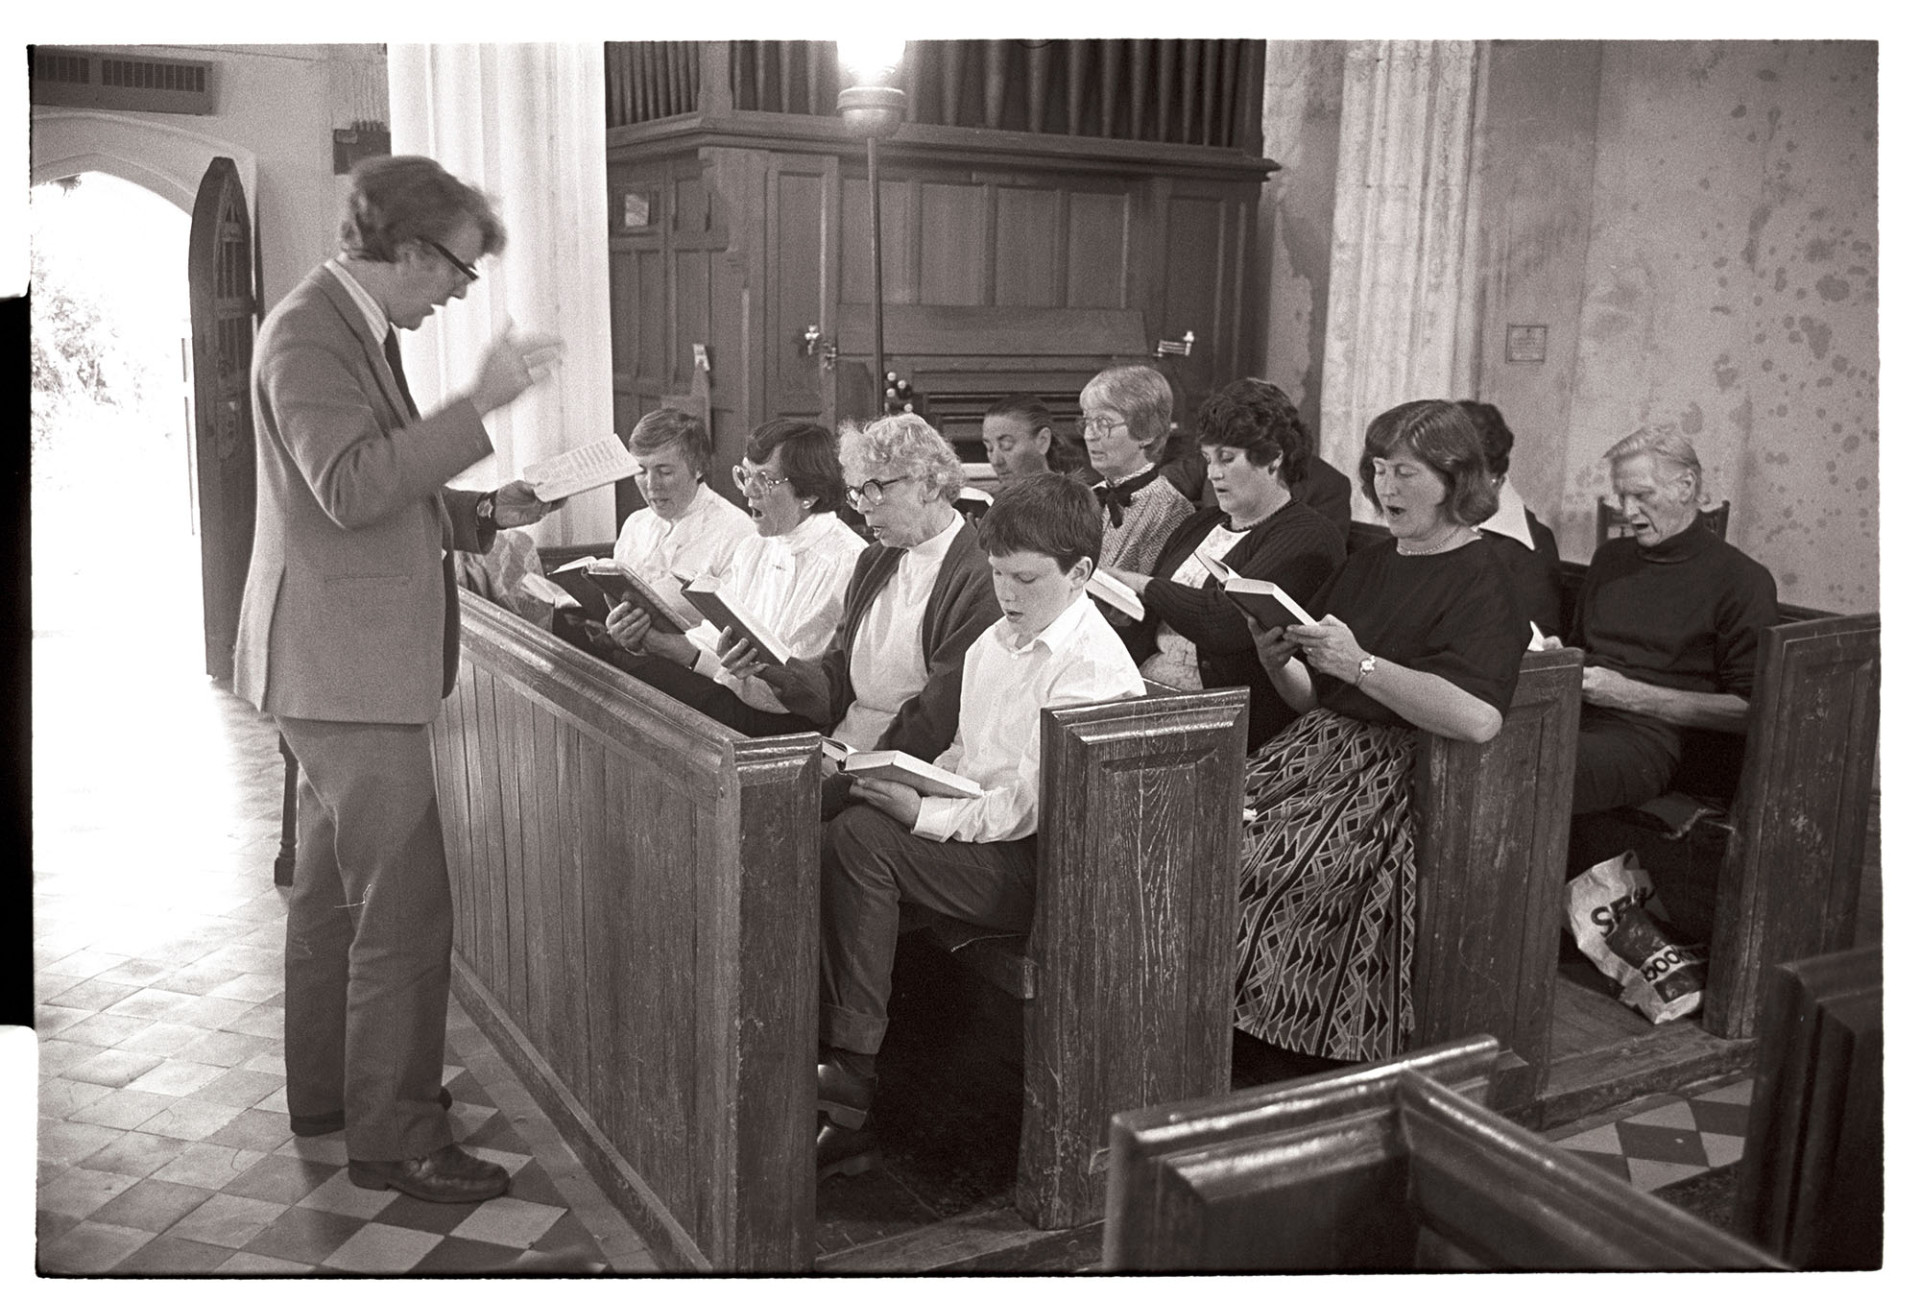 Choir practising in church. 
[David Davis conducting and singing with a choir who are practising at Warkleigh Church. They are sat in pews by the organ and the open church door is visible in the background.]